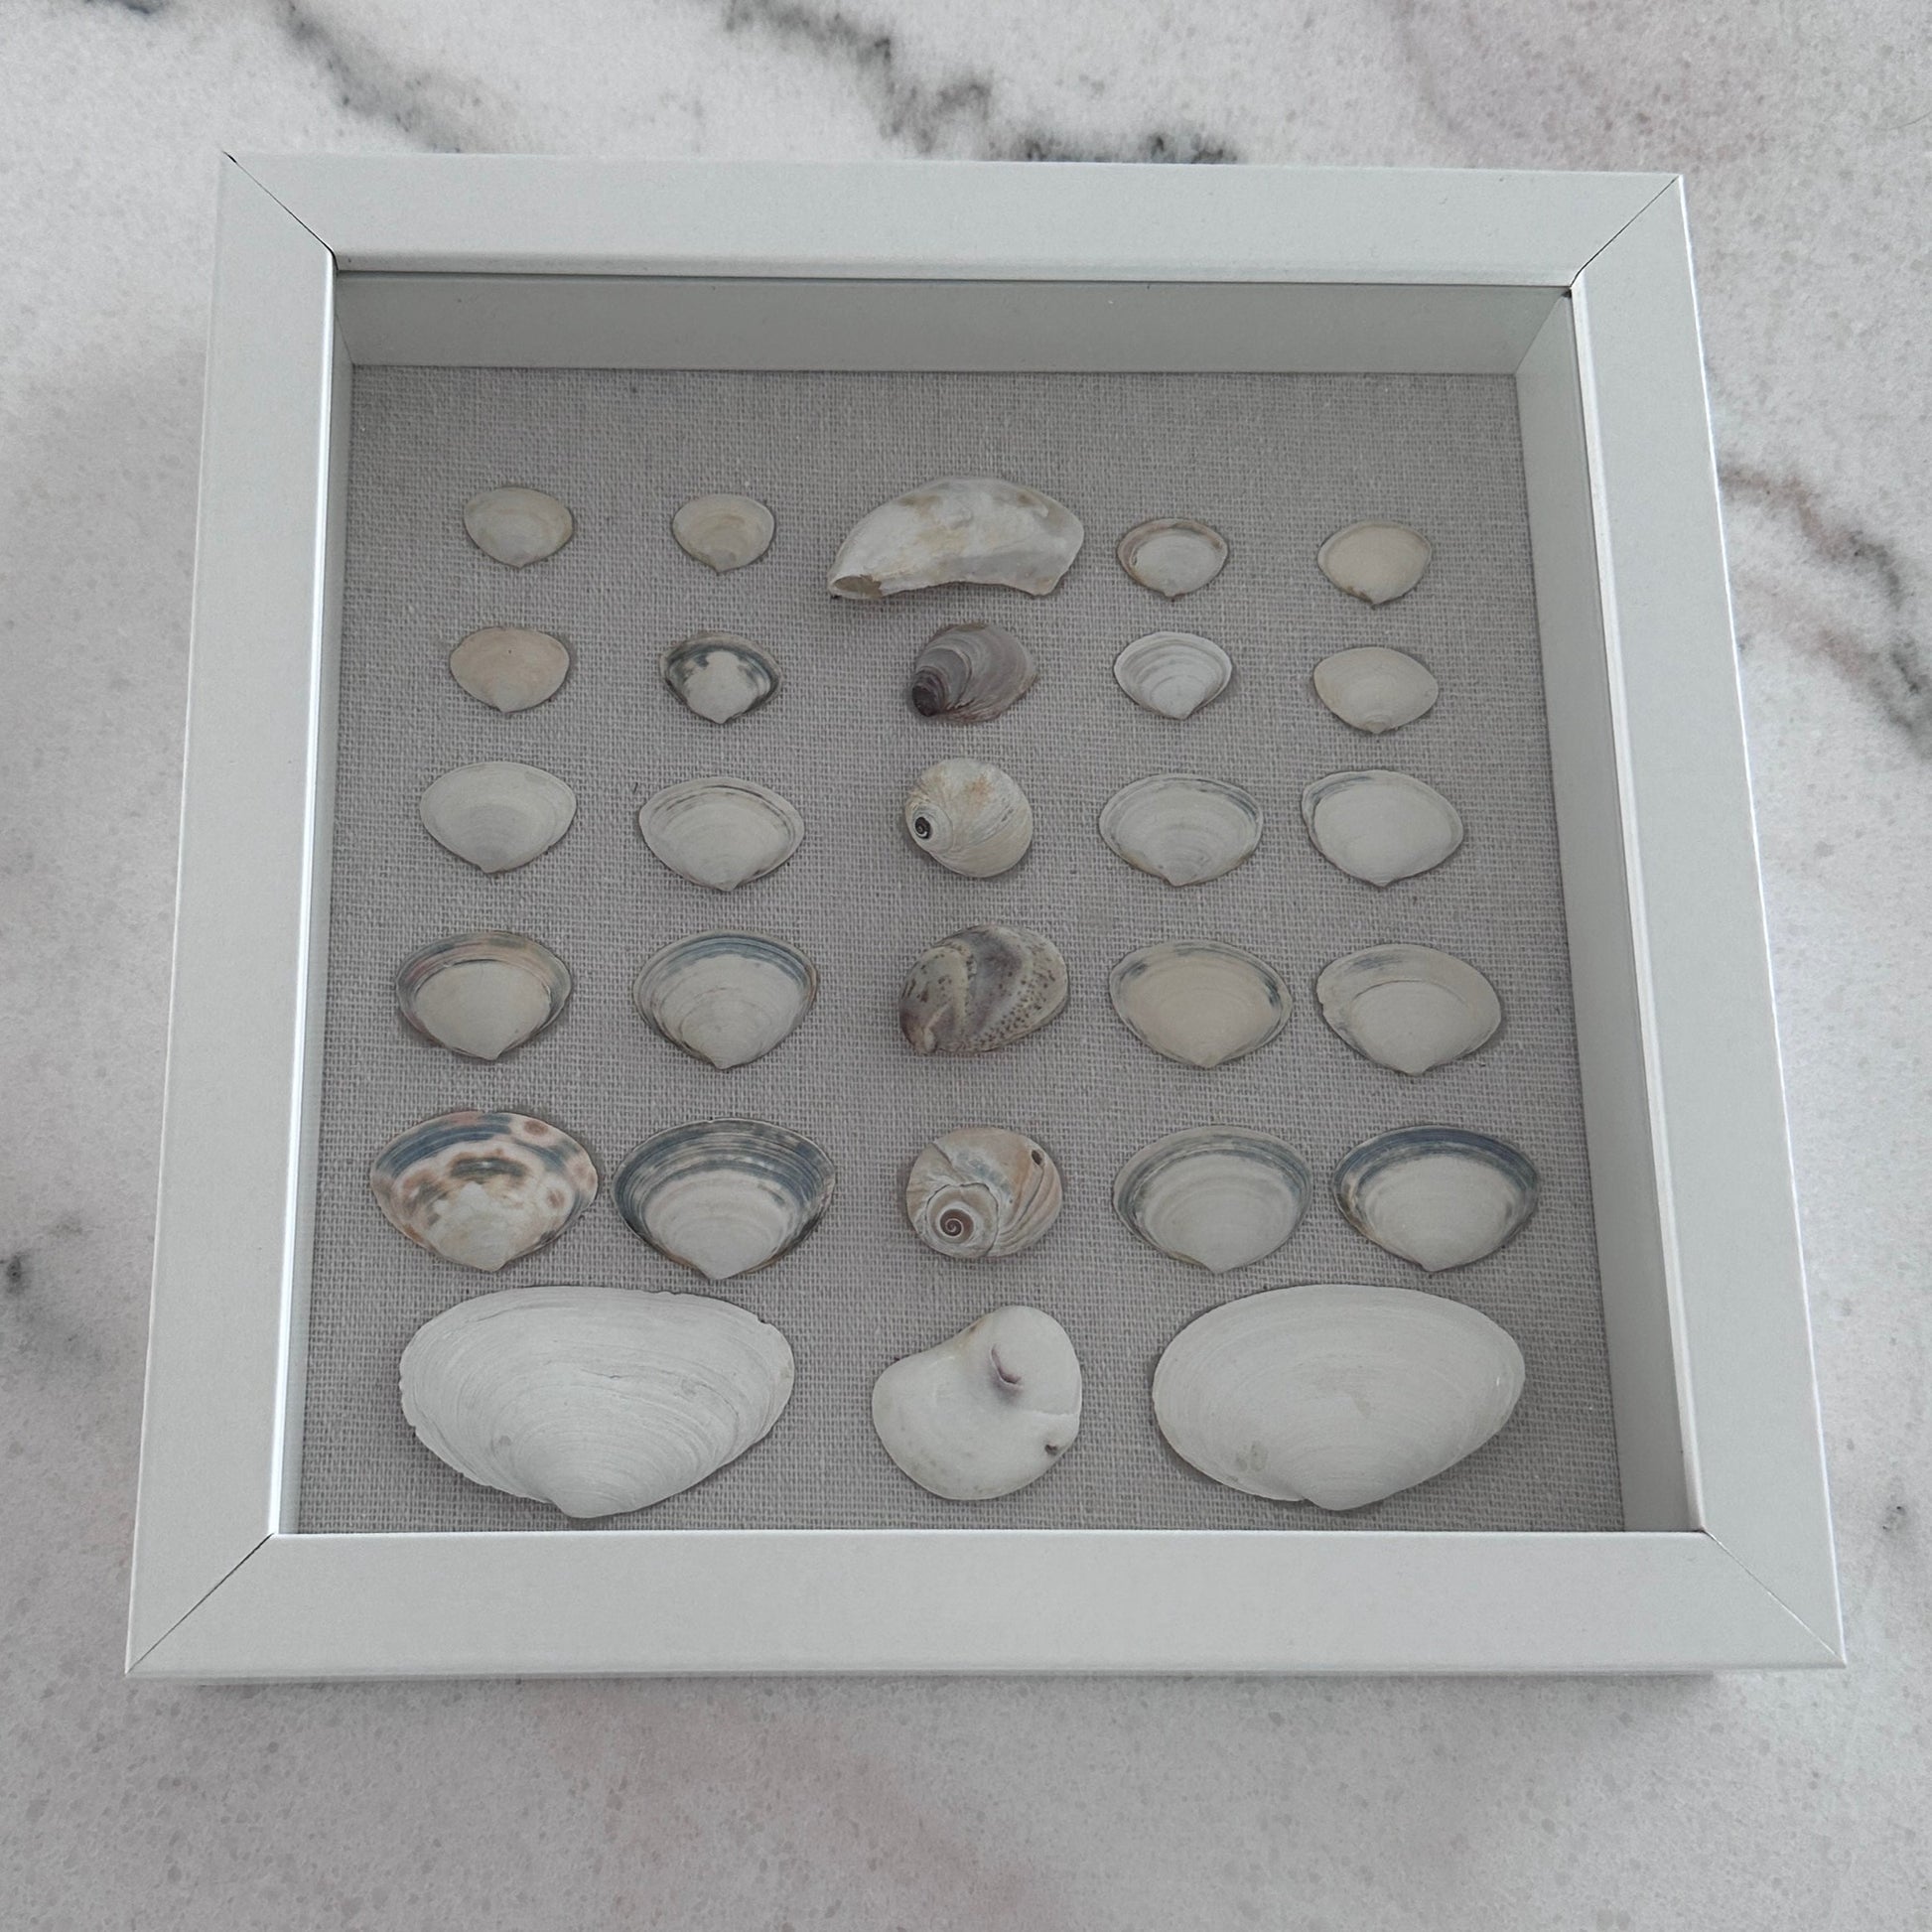 8x8 clam shell shadow box by Jacqueline mb designs 